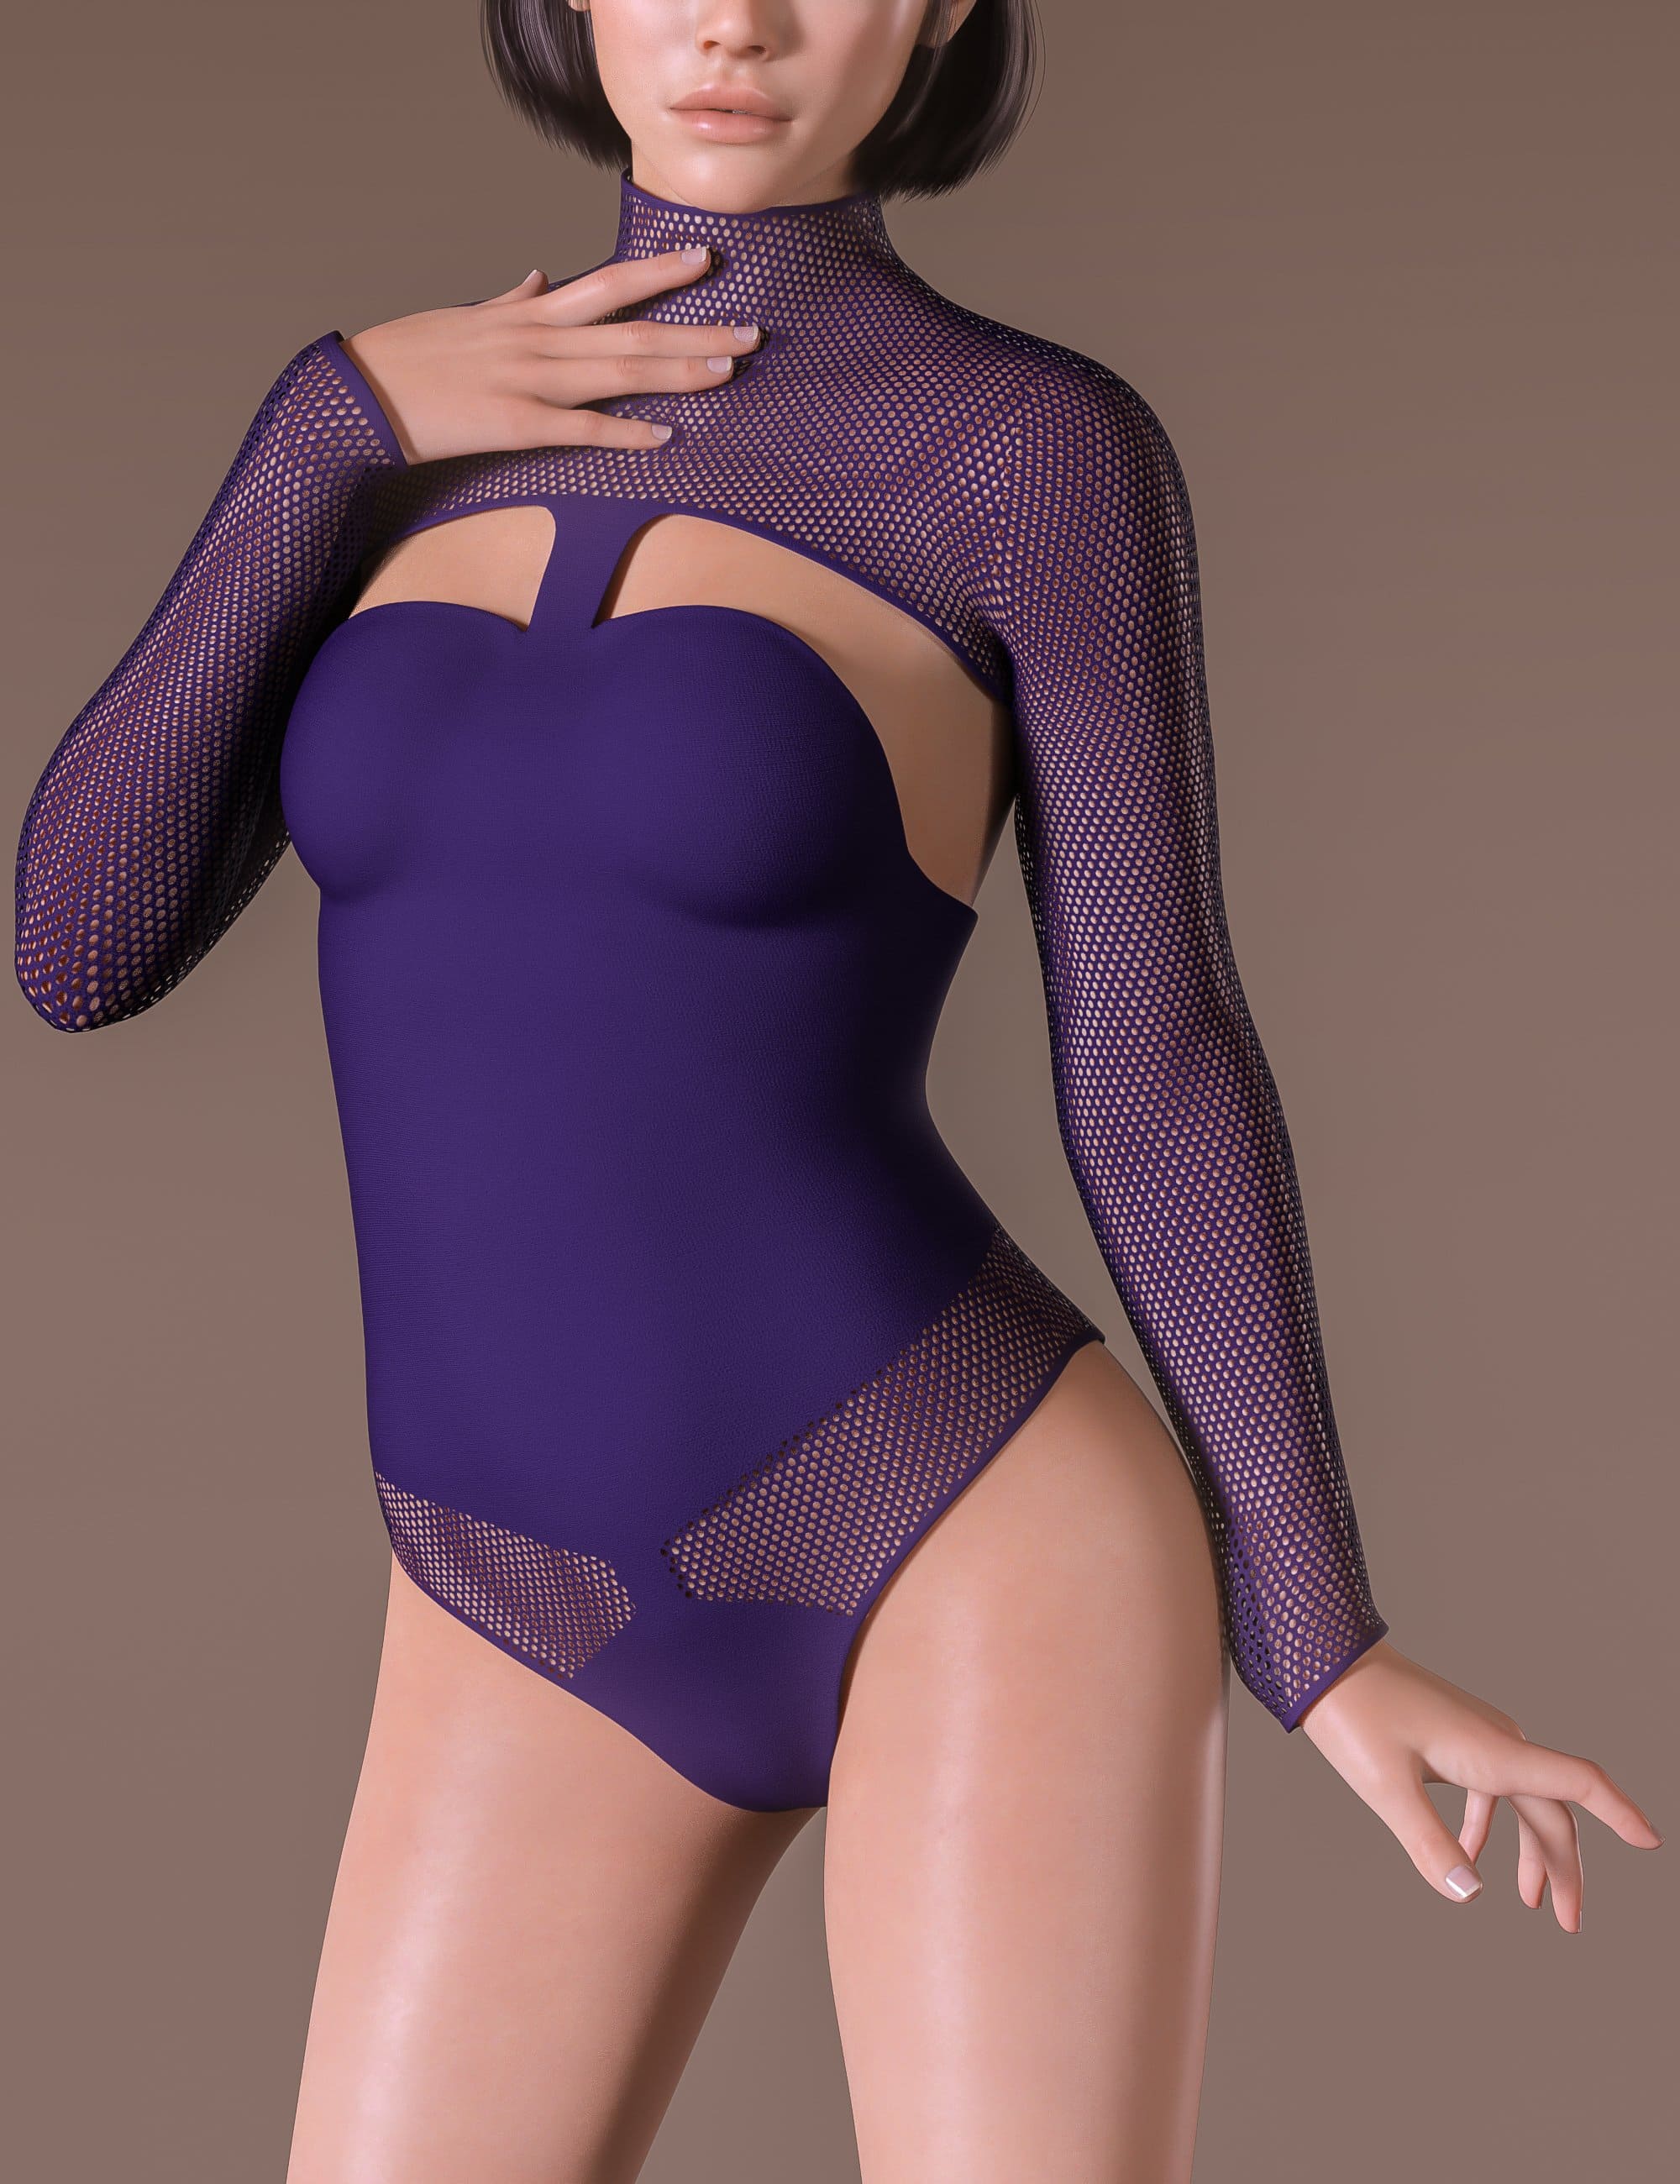 Cora Body Suit Outfit for Genesis 8 and 8.1 FemalesUntitled_DAZ3DDL